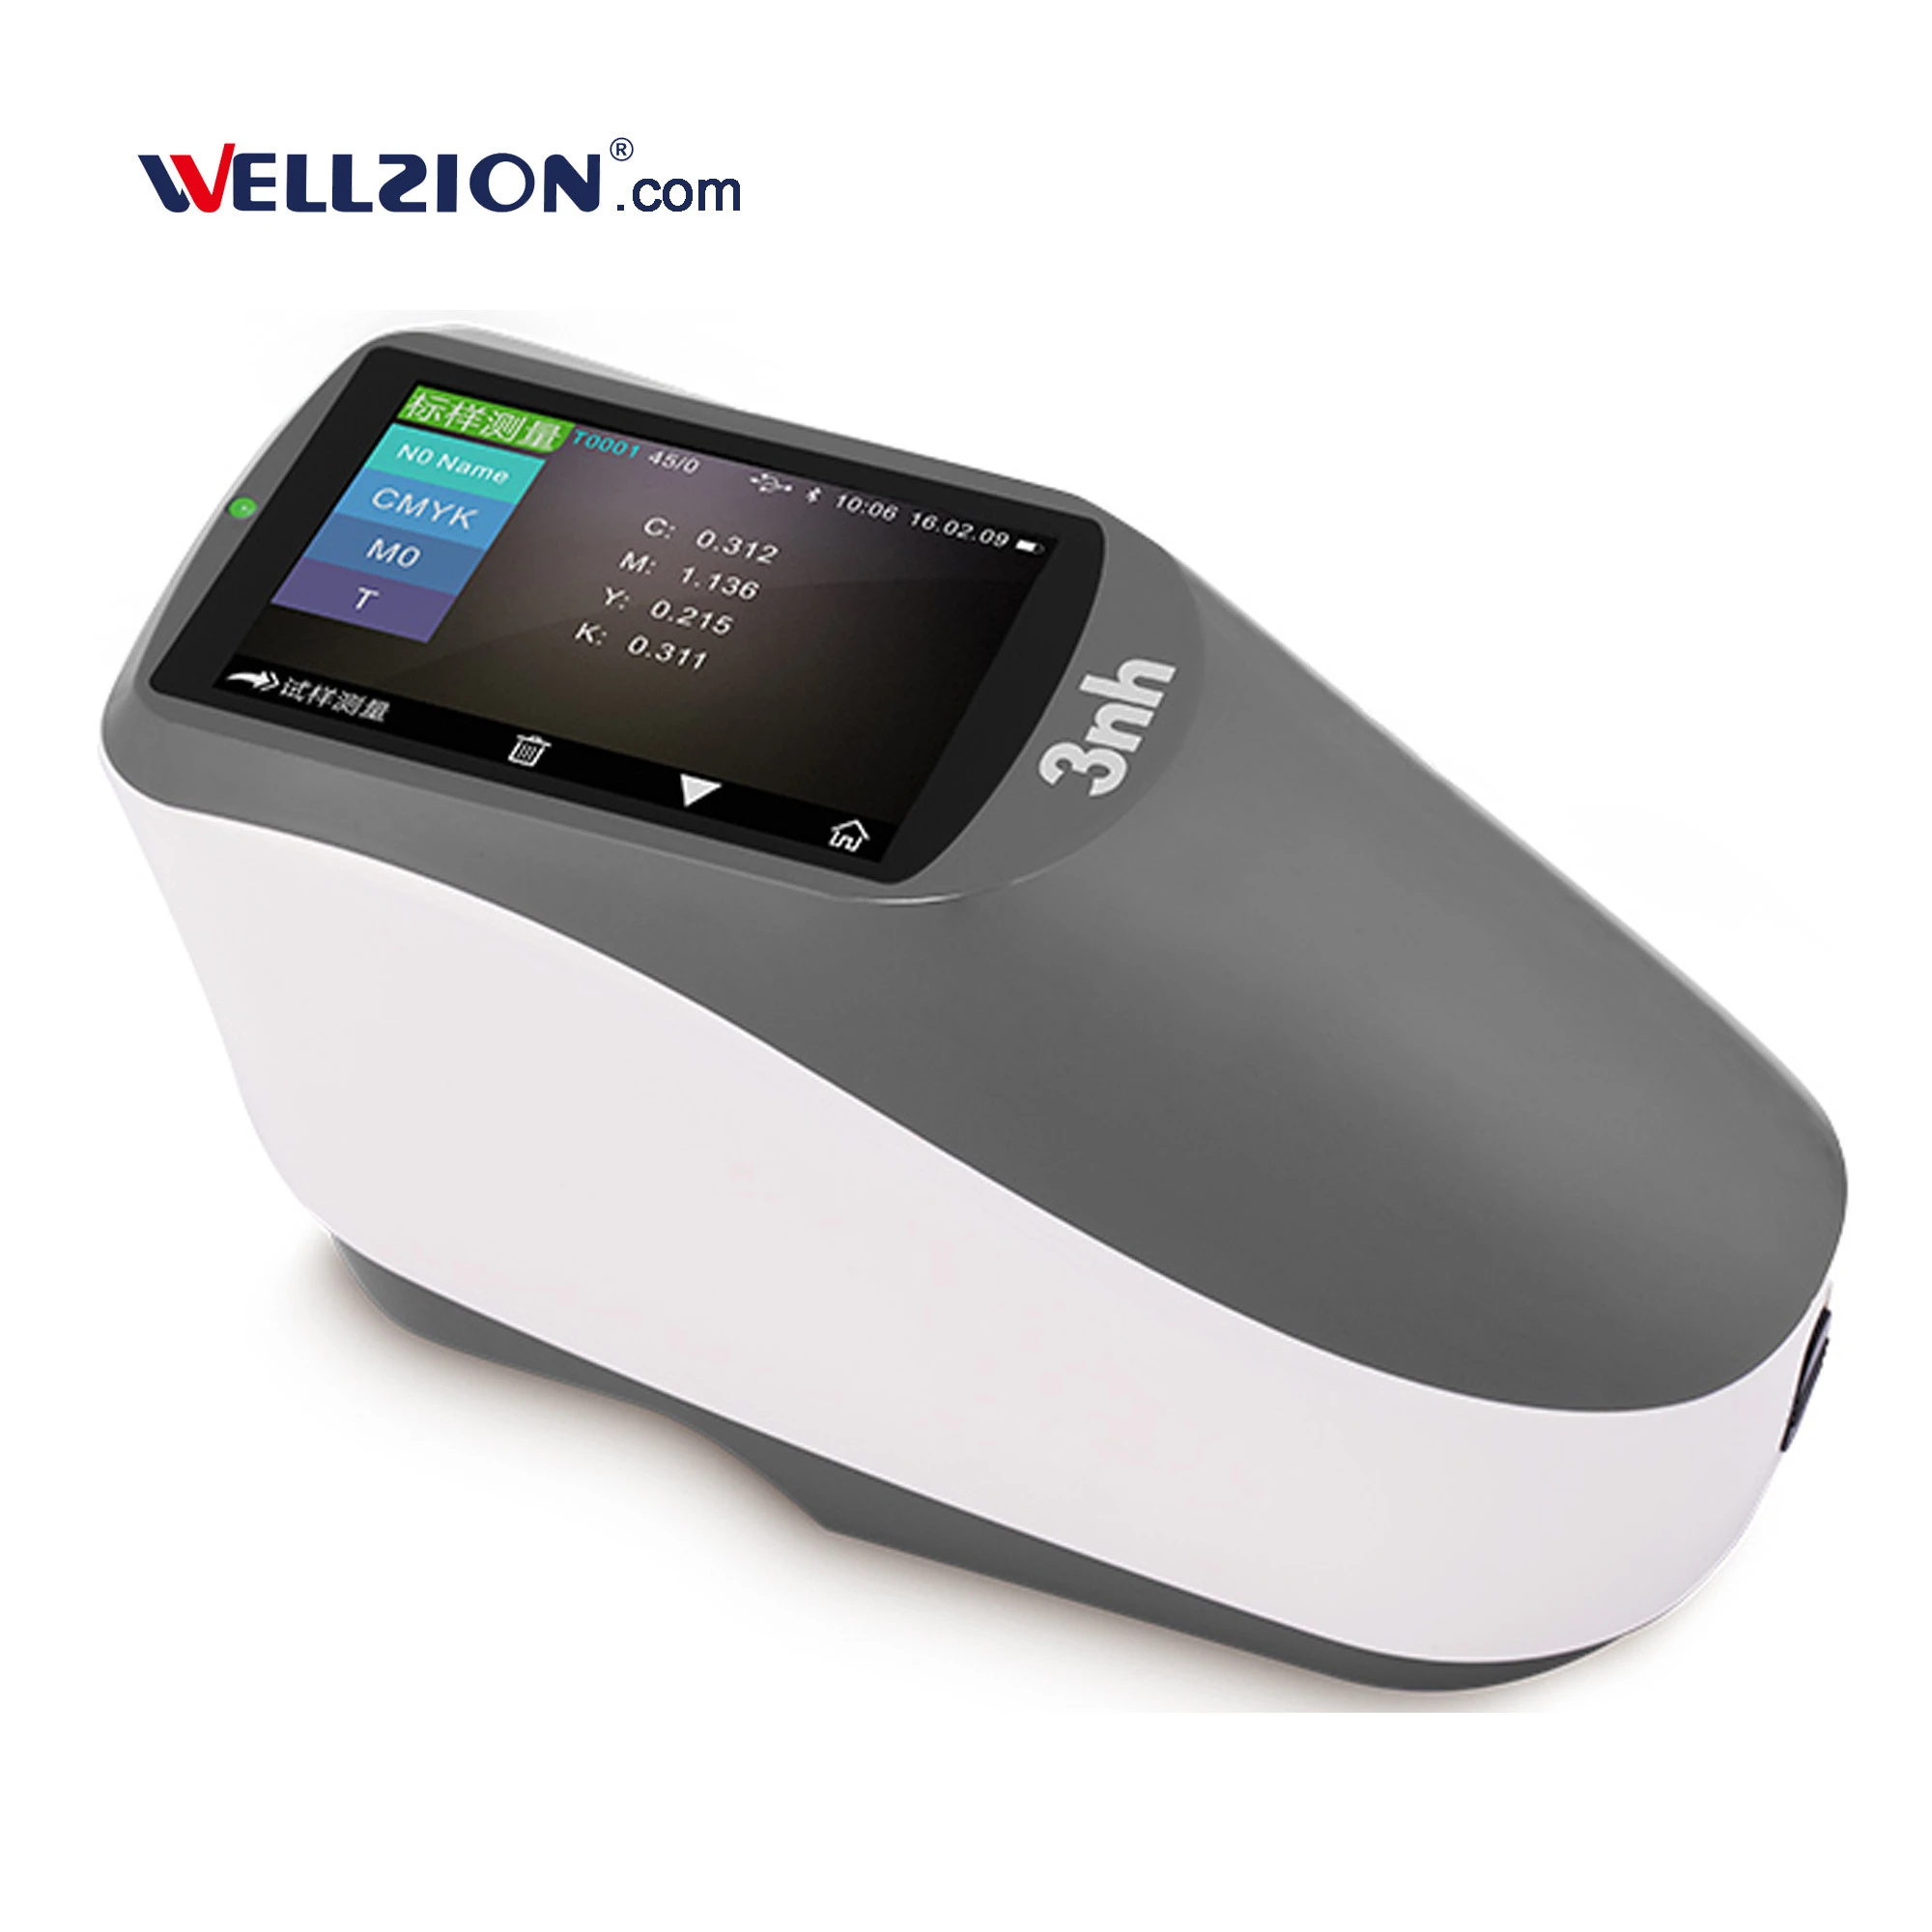 YD5010,400nm to 700nm Wavelength Spectrophotometer Function Densitometer